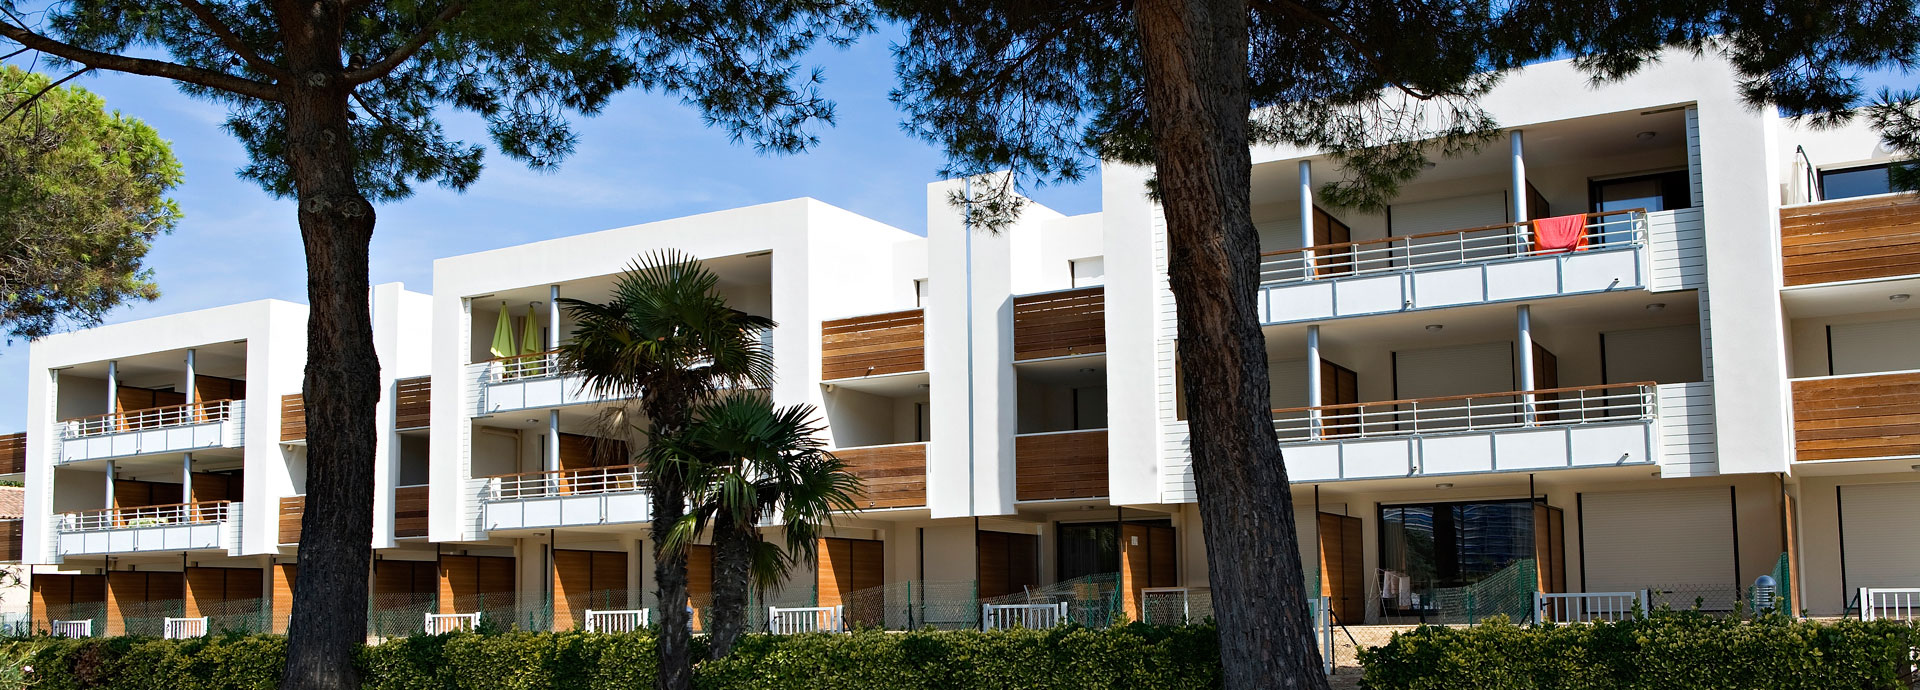 Holiday rental at Cannes Mandelieu-la-Napoule : Carre Marine residence